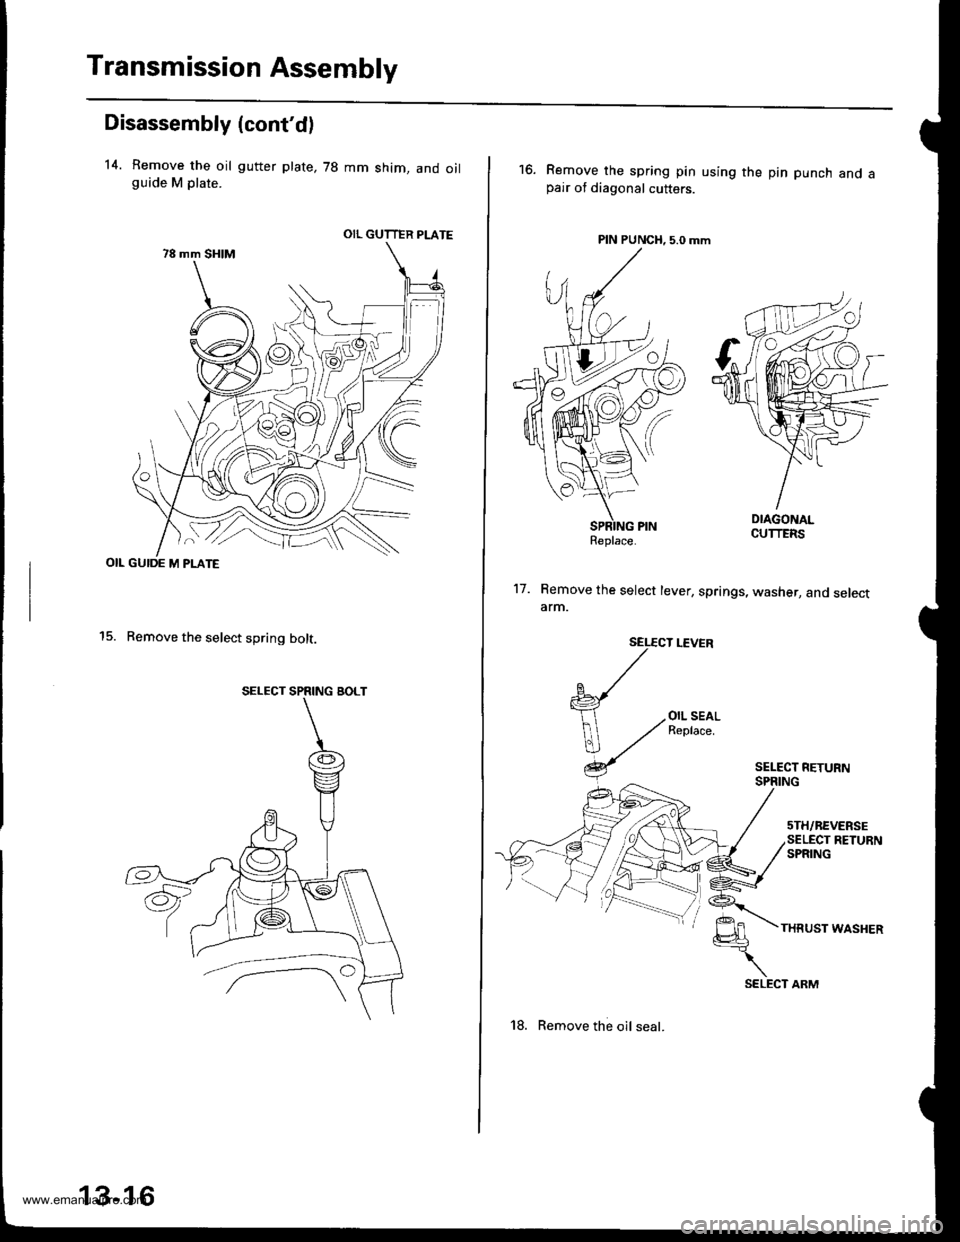 HONDA CR-V 1999 RD1-RD3 / 1.G Workshop Manual 
Transmission Assembly
Disassembly (contdl
14. Remove the oil gutter plate, 78 mm shim, and oilguide M plate.
OIL GUIDE M PLATE
15. Remove the select spring bolt.
OIL GUTTER PLATE
SELECT SPRING BOLT
